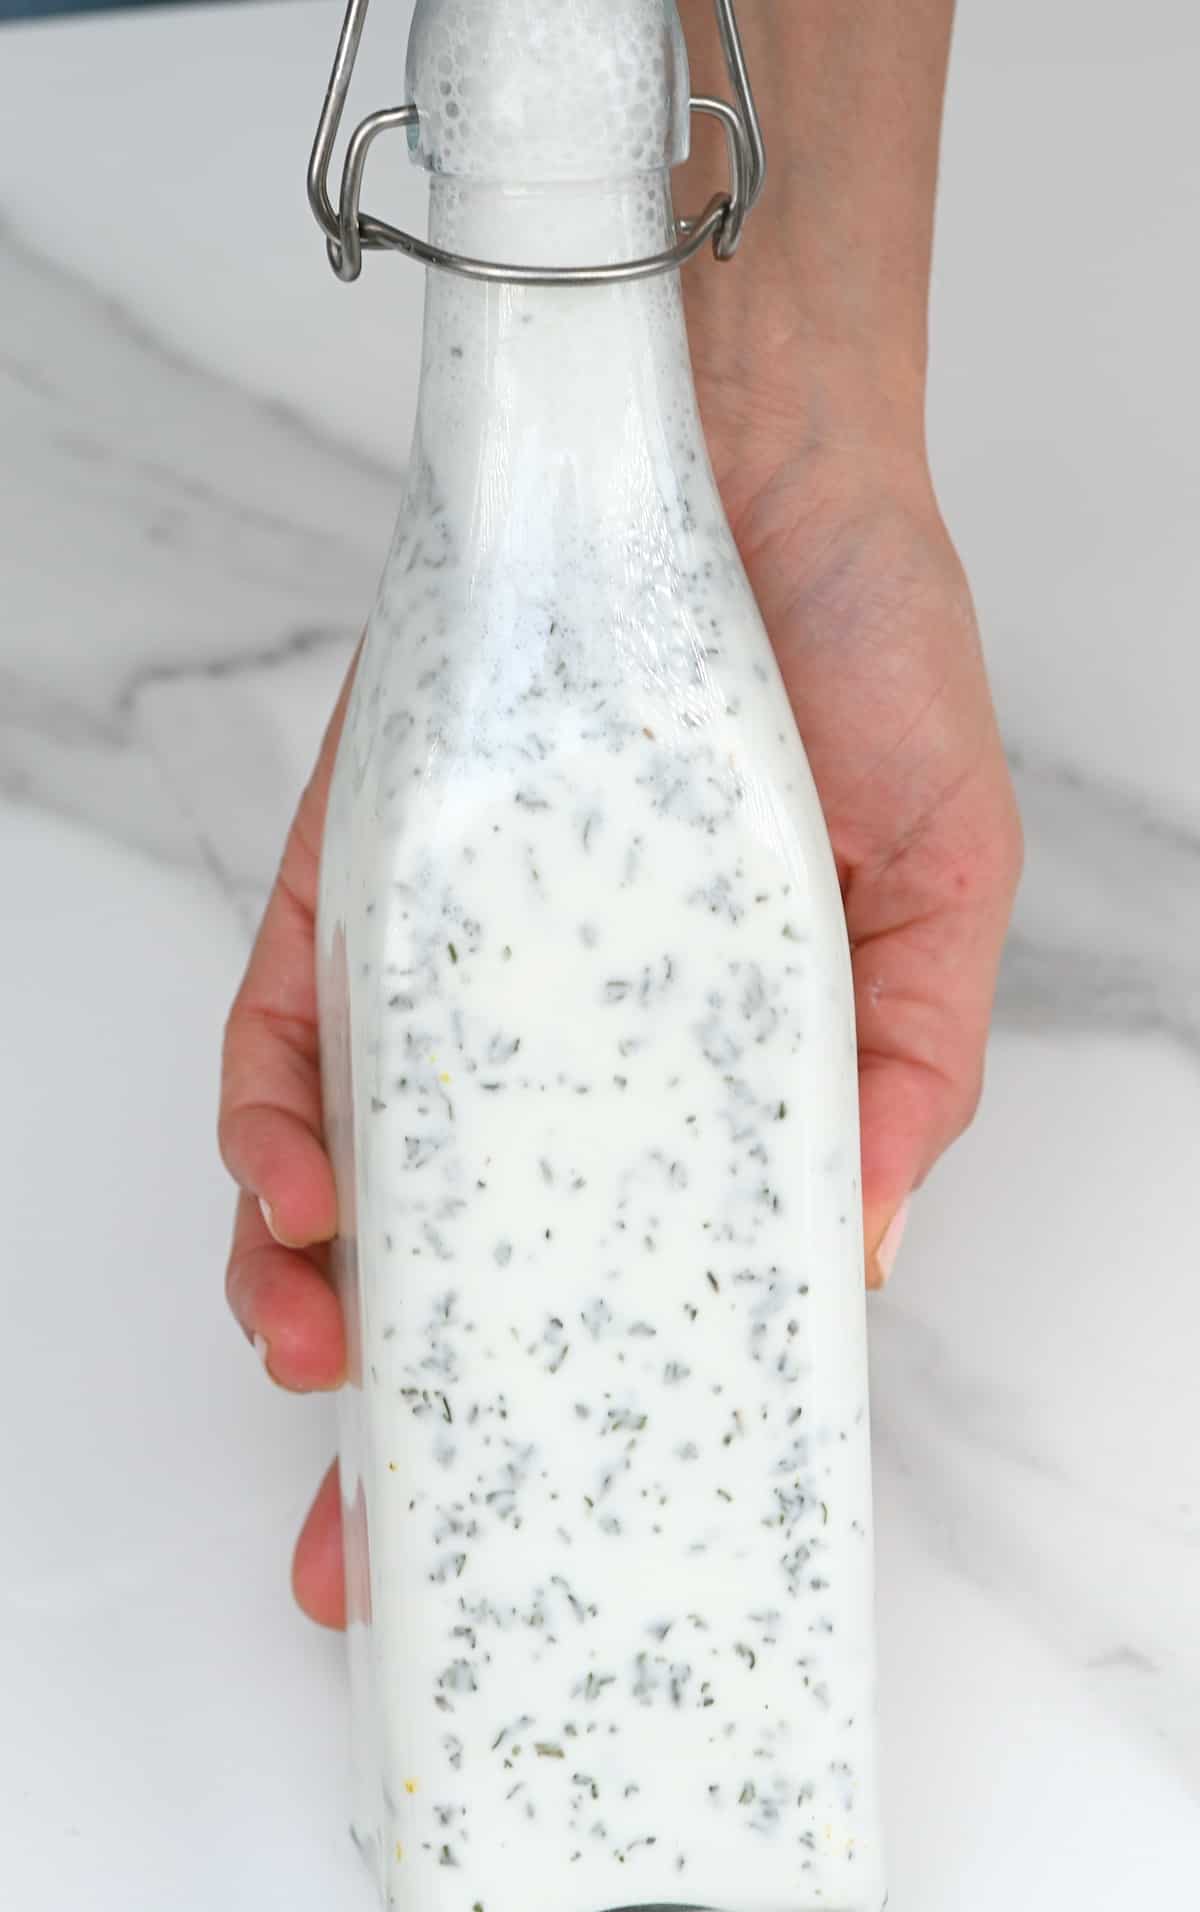 A bottle with ayran